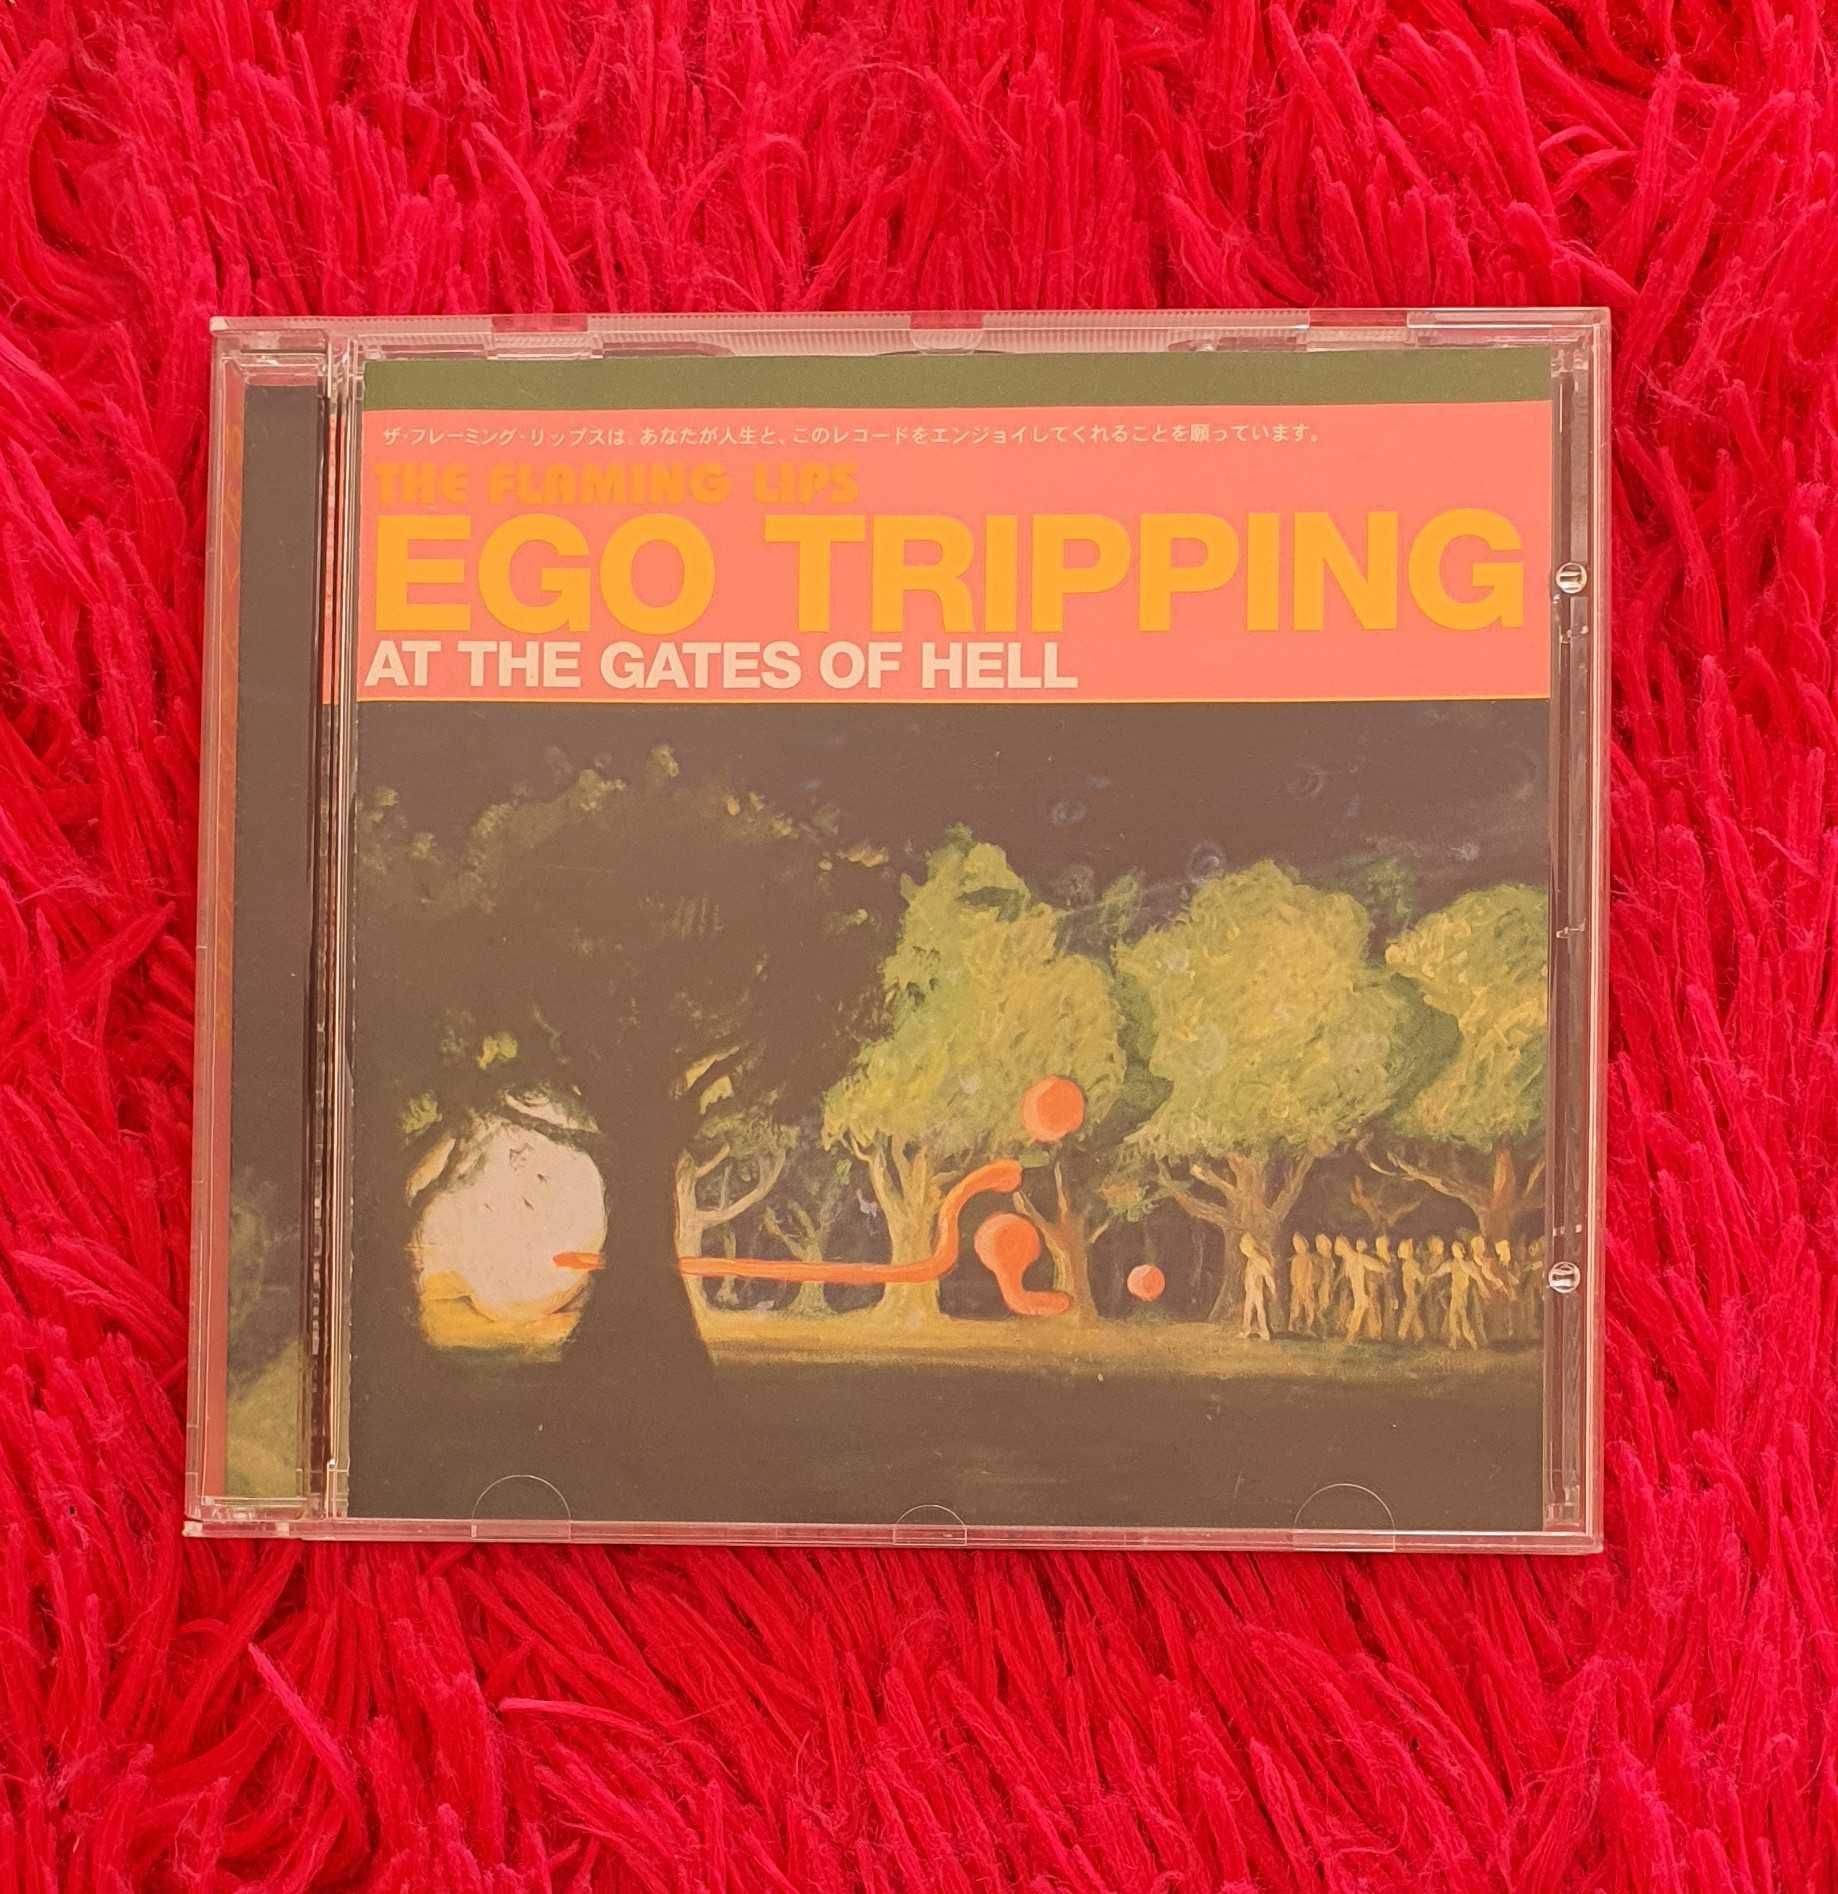 The Flaming Lips Ego Tripping At The Gates of Hell EP CD jewel case